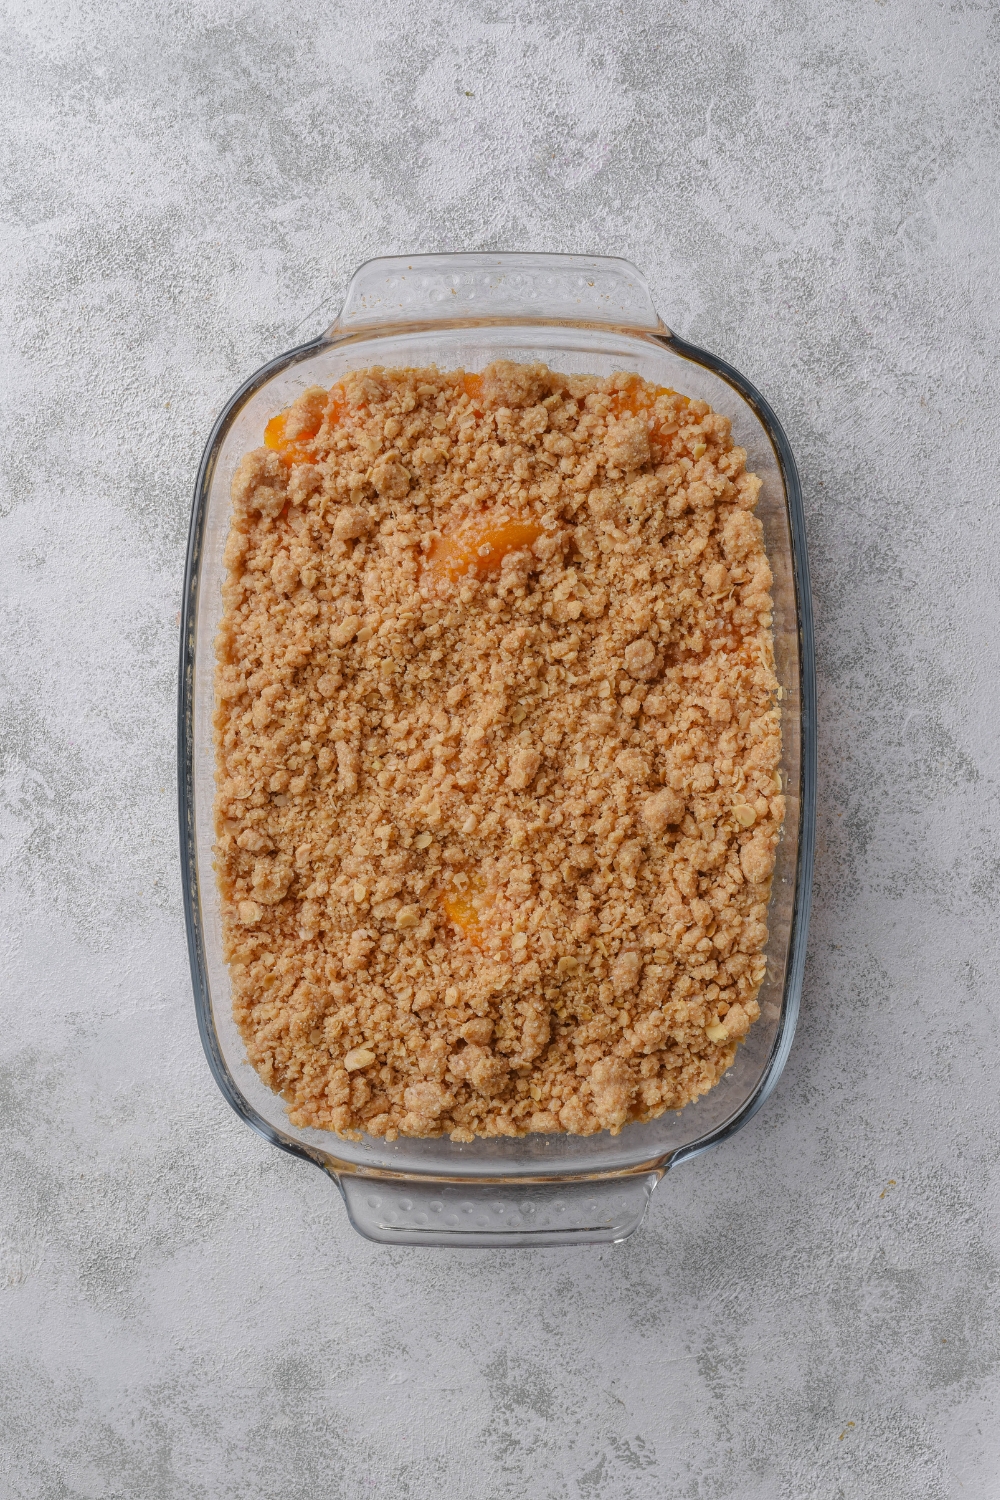 A glass baking dish holds a golden brown baked peach crisp with canned peaches.